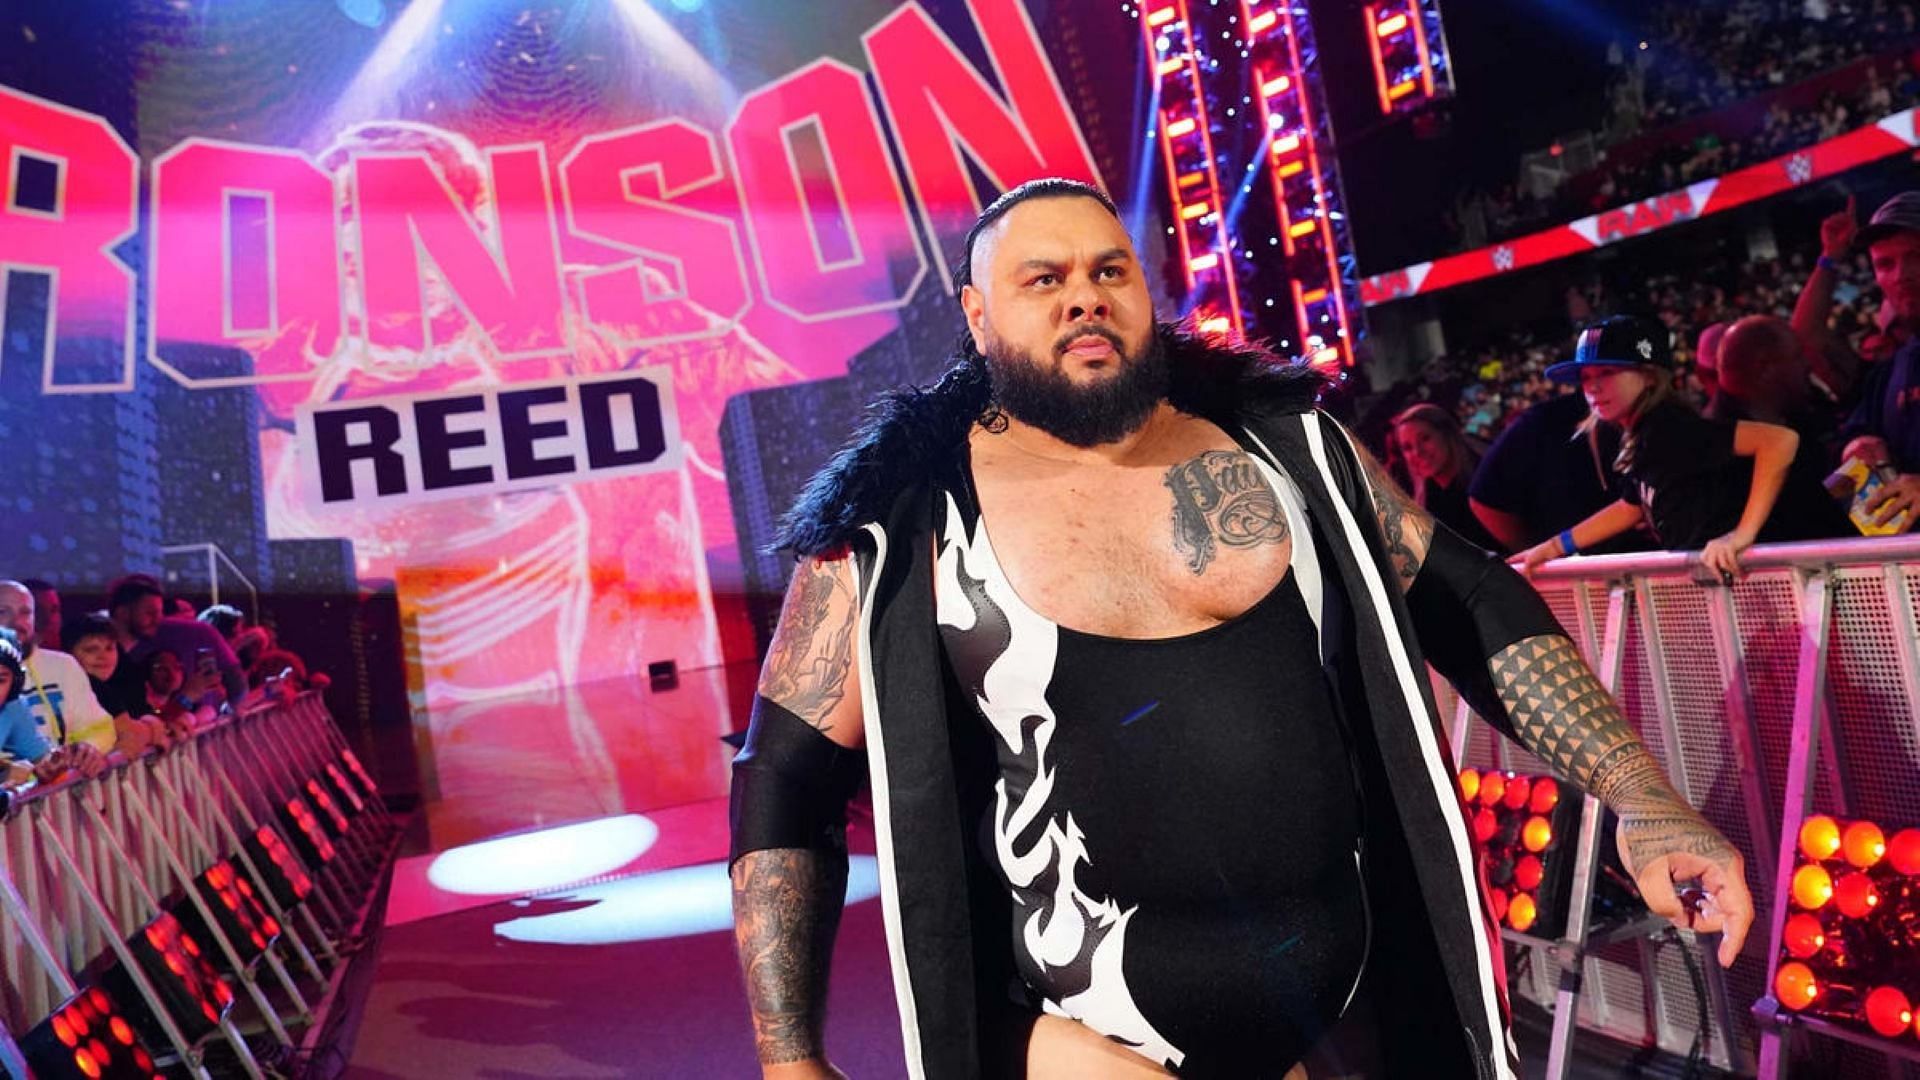 Bronson Reed heads to the ring on WWE RAW